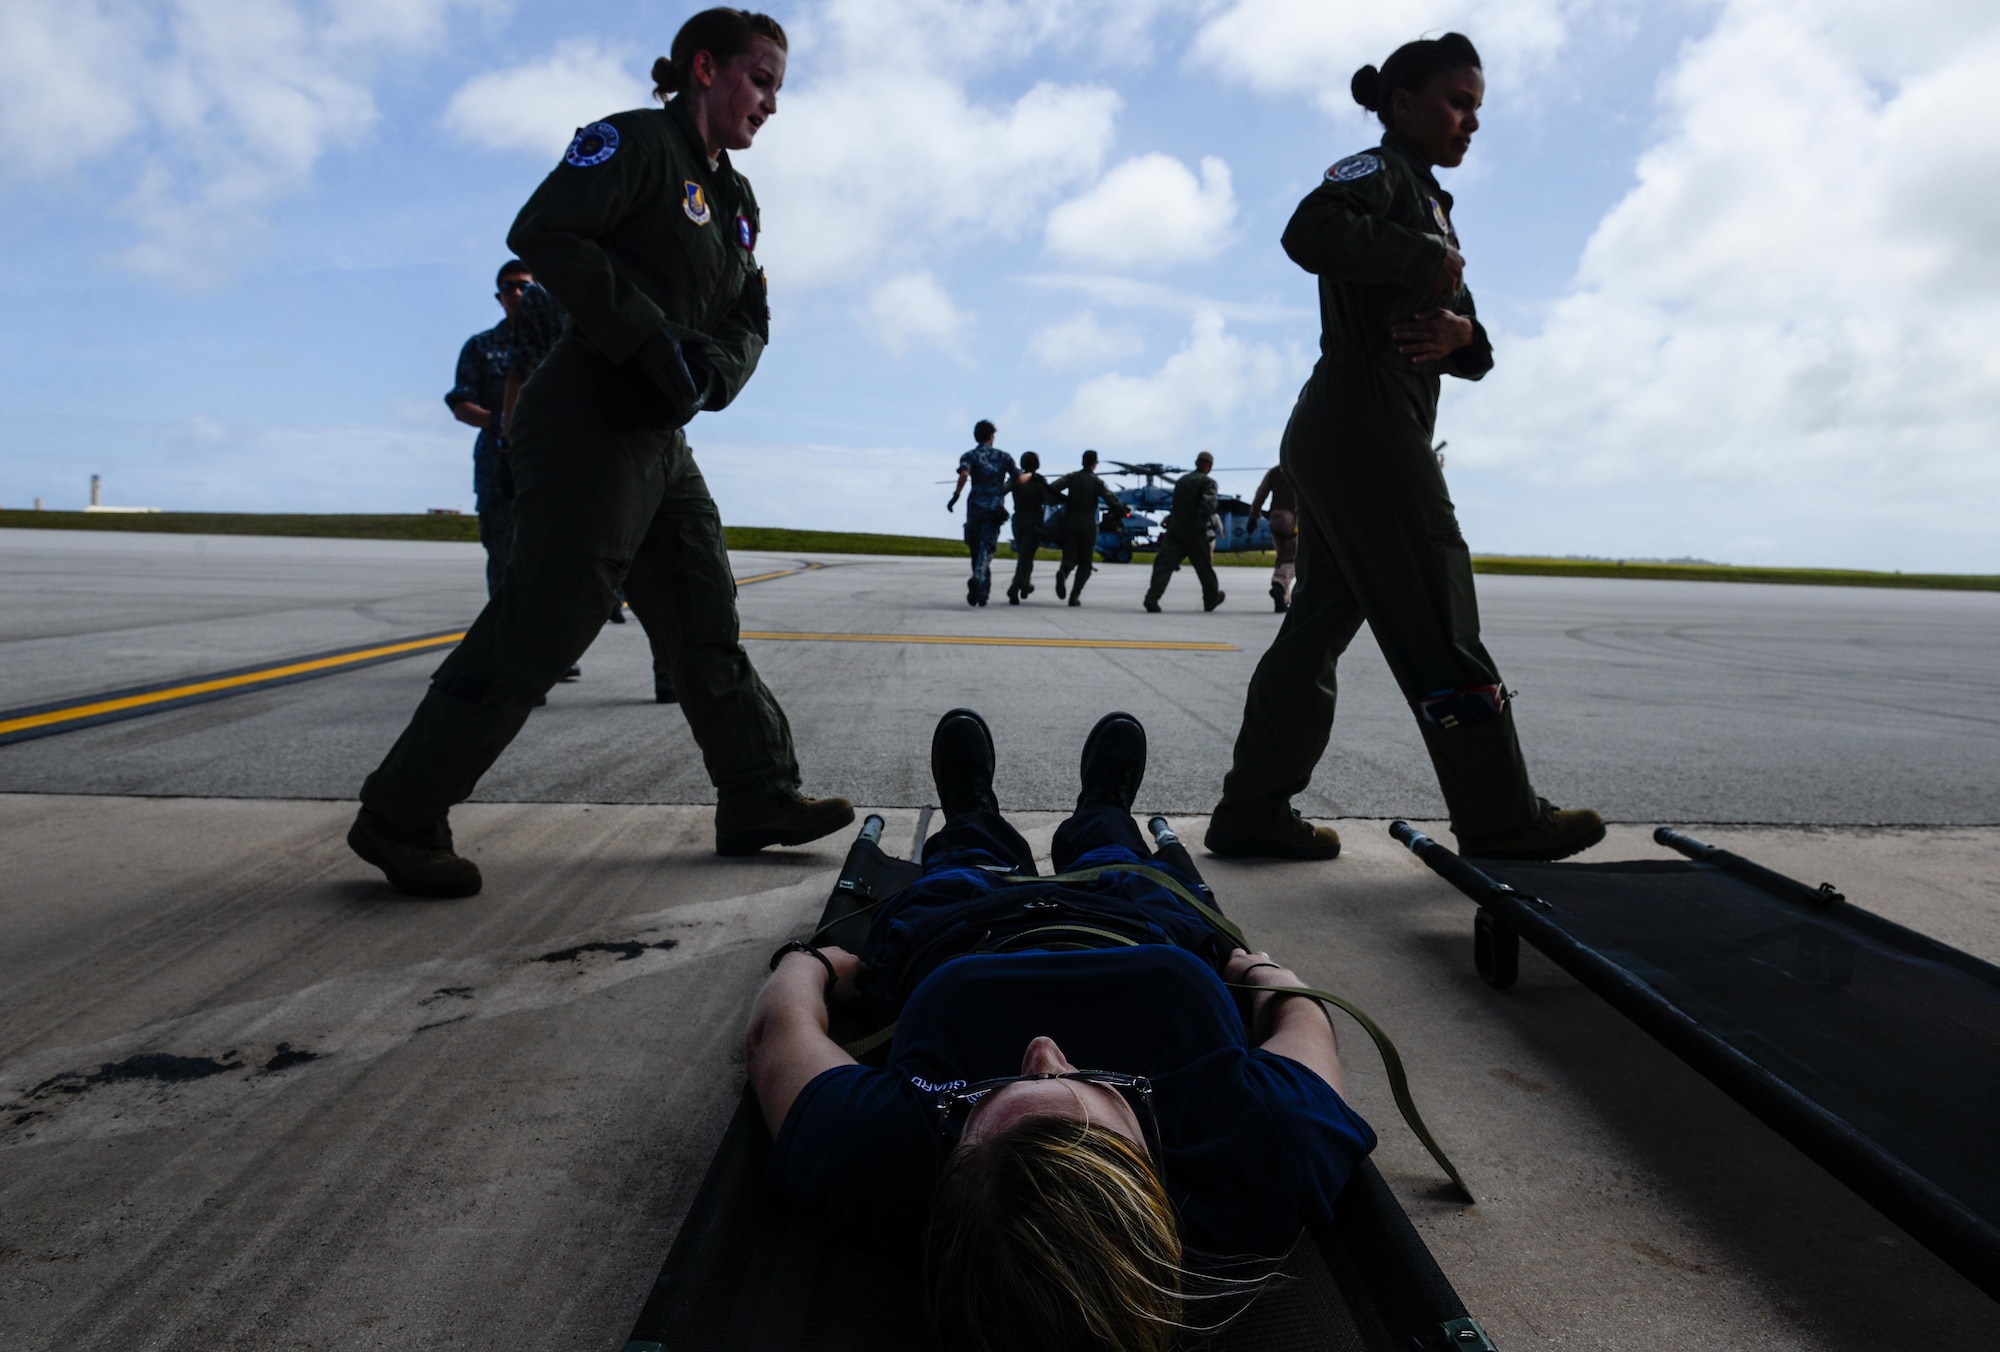 A patient with simulated injuries lies waiting while U.S. Air Force and Japan Air Self-Defense Force aeromedical evacuation crews prepare for a patient transfer Feb. 17, 2016, at Andersen Air Force Base, Guam. Exercise Cope North 16 enhances humanitarian assistance and disaster relief crisis response capabilities between six nations and lays the foundation for regional cooperation expansion during real-world contingencies in the Indo-Asia-Pacific Region. (U.S. Air Force photo by Staff Sgt. Alexander W. Riedel/Released)